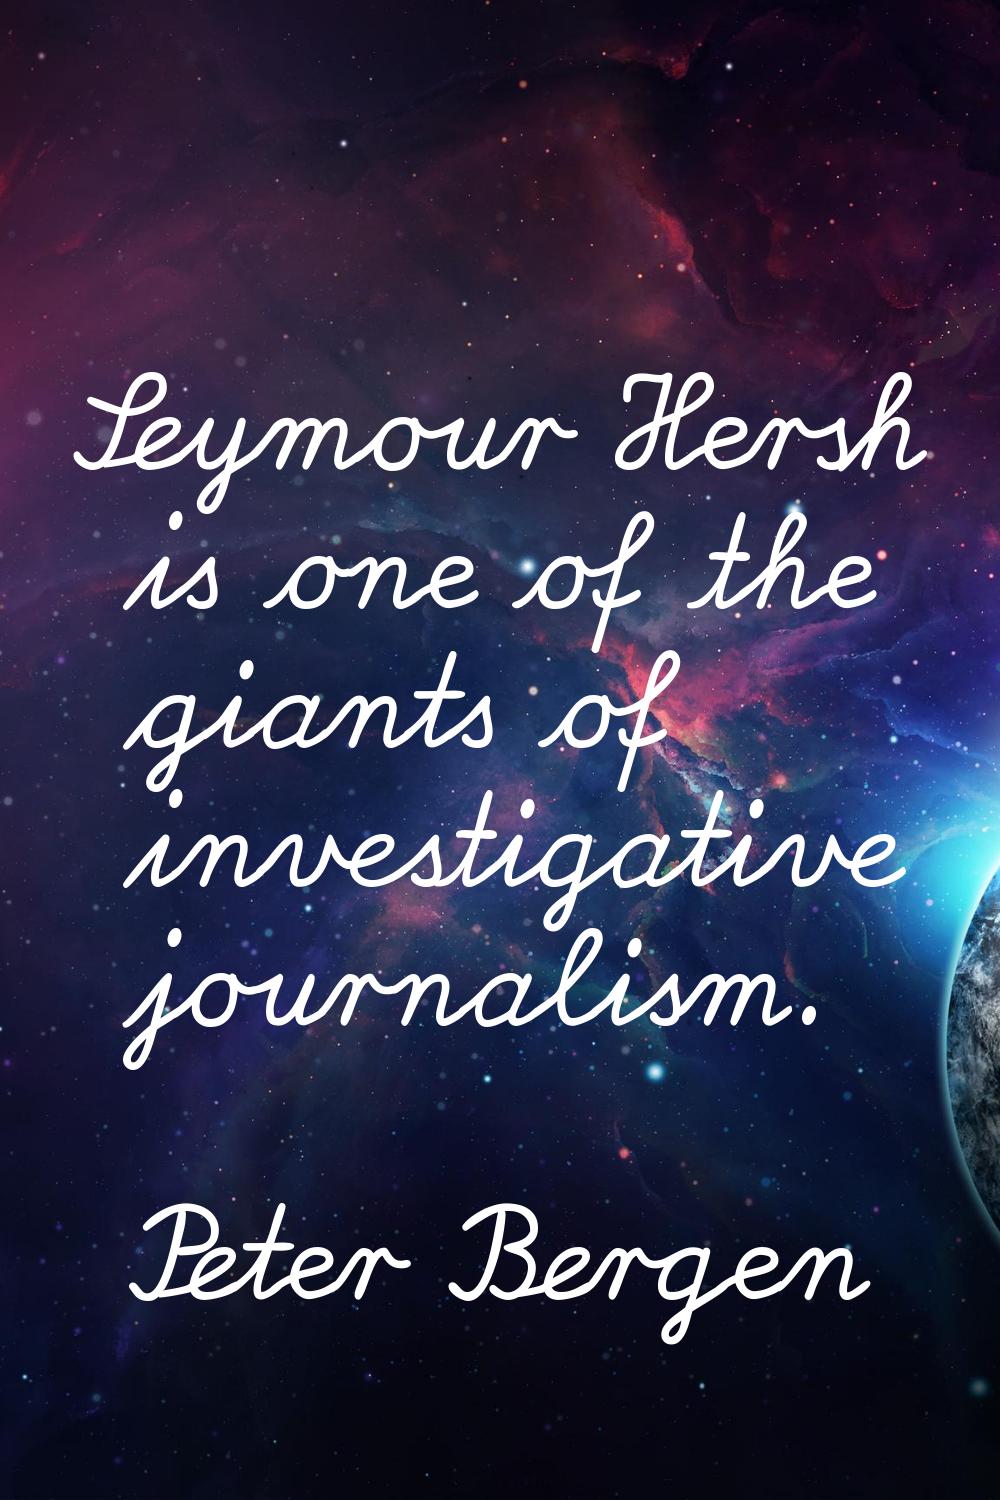 Seymour Hersh is one of the giants of investigative journalism.